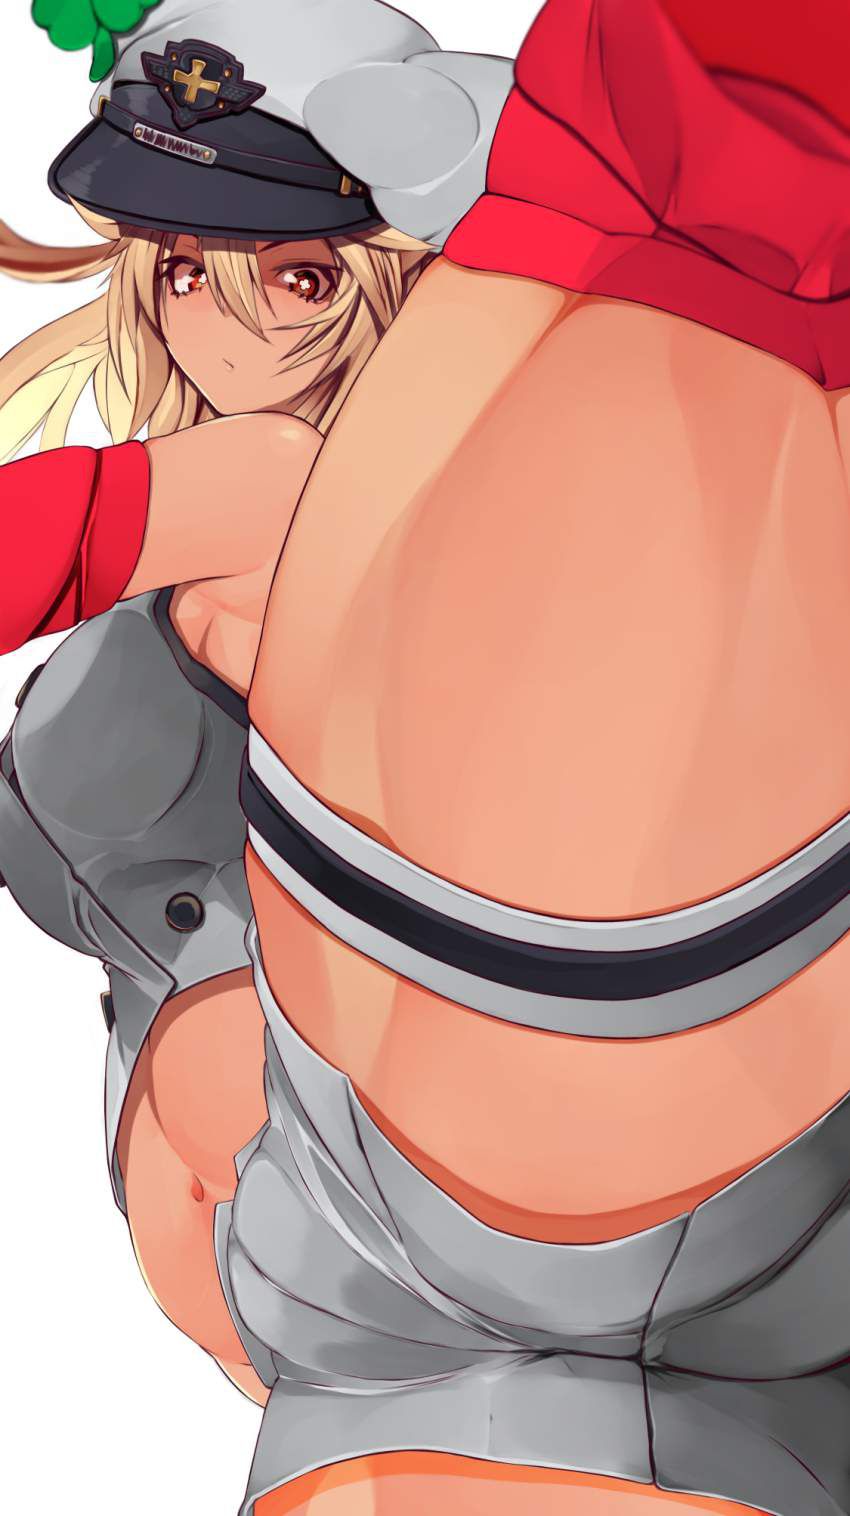 【Guilty Gear】Ram Rezzar = Valentine's Middle-Out Secondary Erotic Image Summary 4